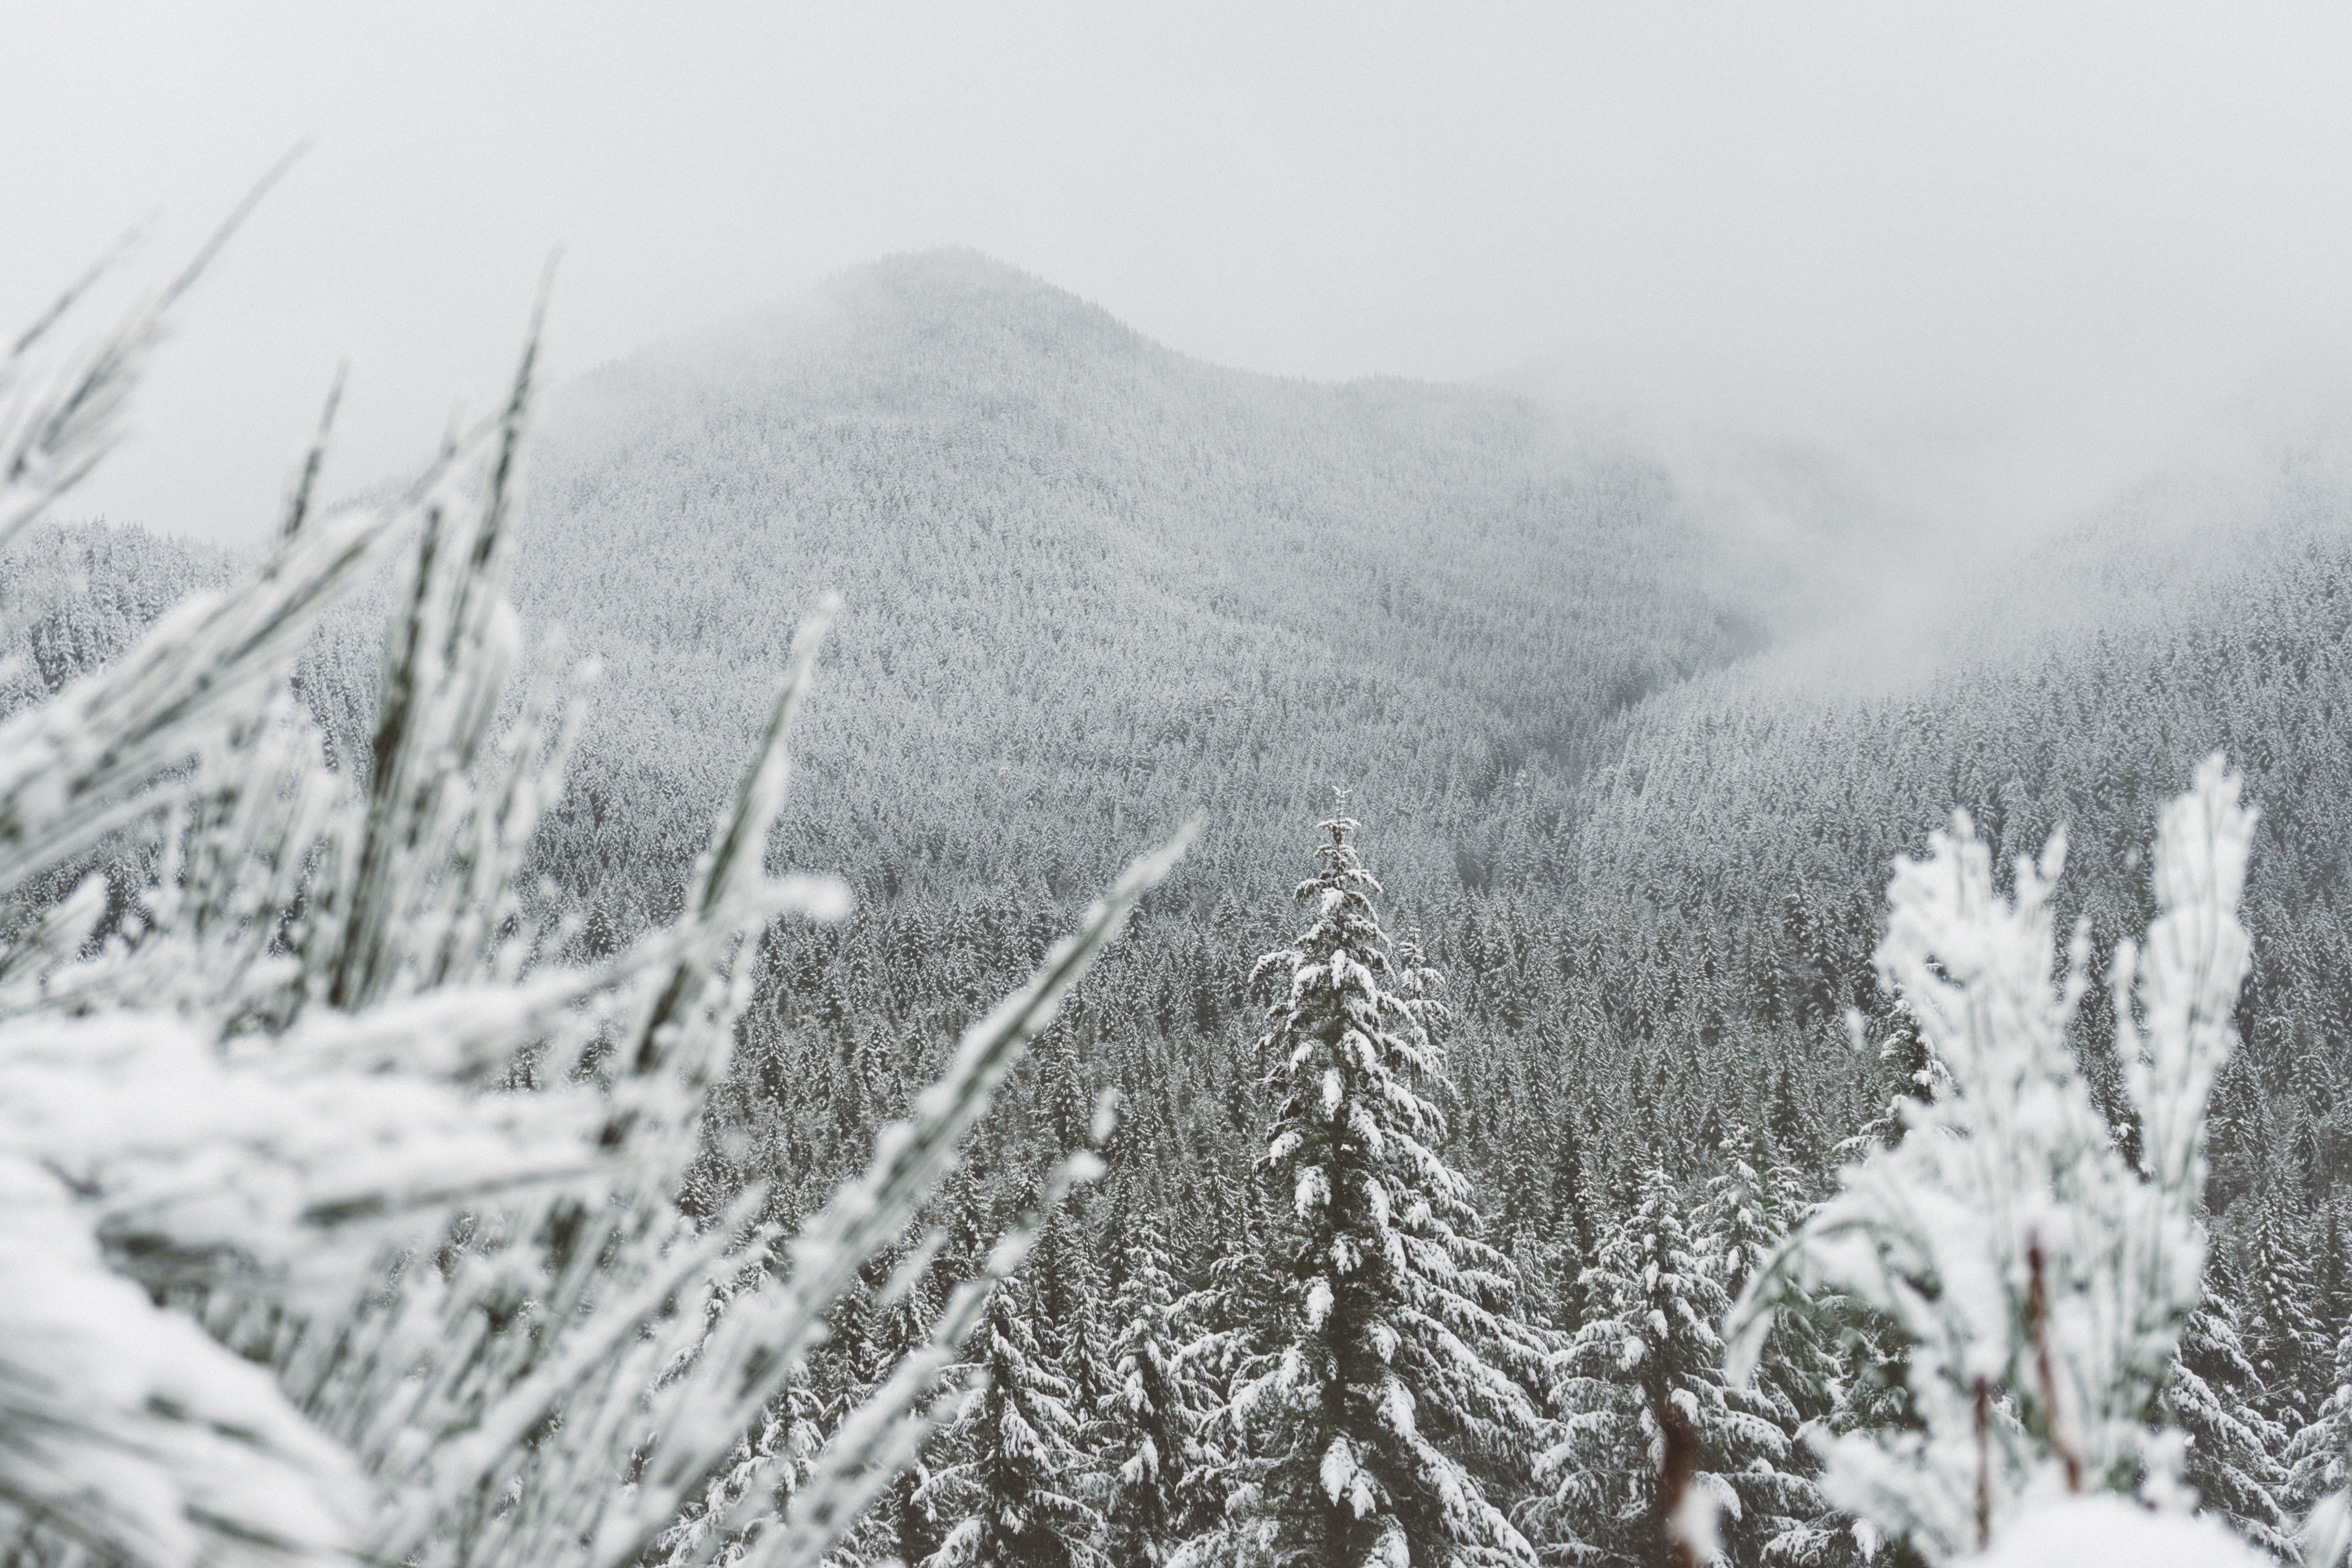 6000x4000 #valley, #weather, #fog, #wallpaper, #snow, #ice, #wood, # winter, #forest, #christmas wallpaper, #mountain, #evergreen, #white, #pine, #slope, #Free , #fir, #cloud, #tree, #christmas background, #cold HD Wallpaper